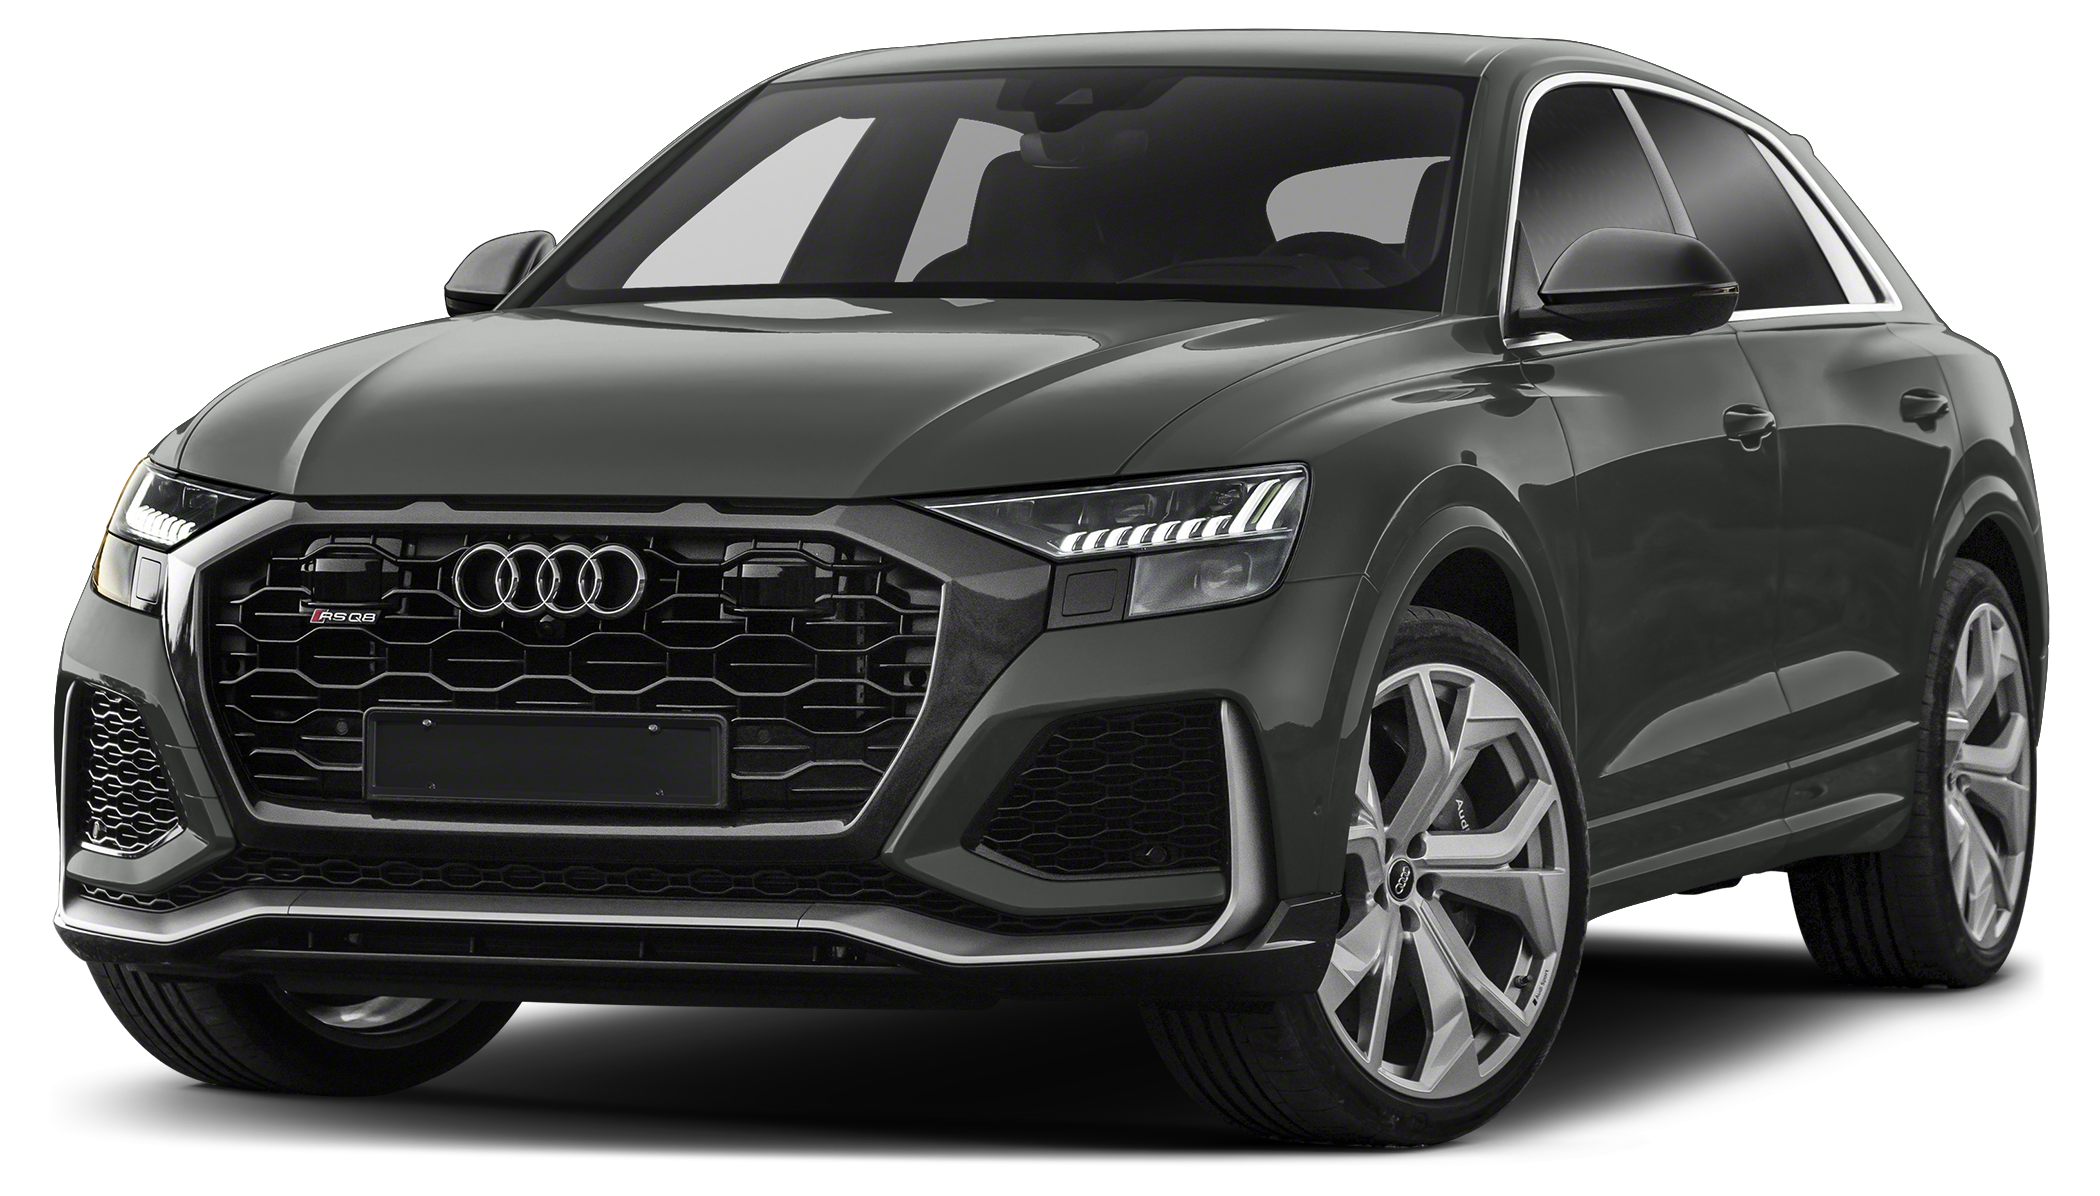 2021 Jeep® RS Q8 4.0T